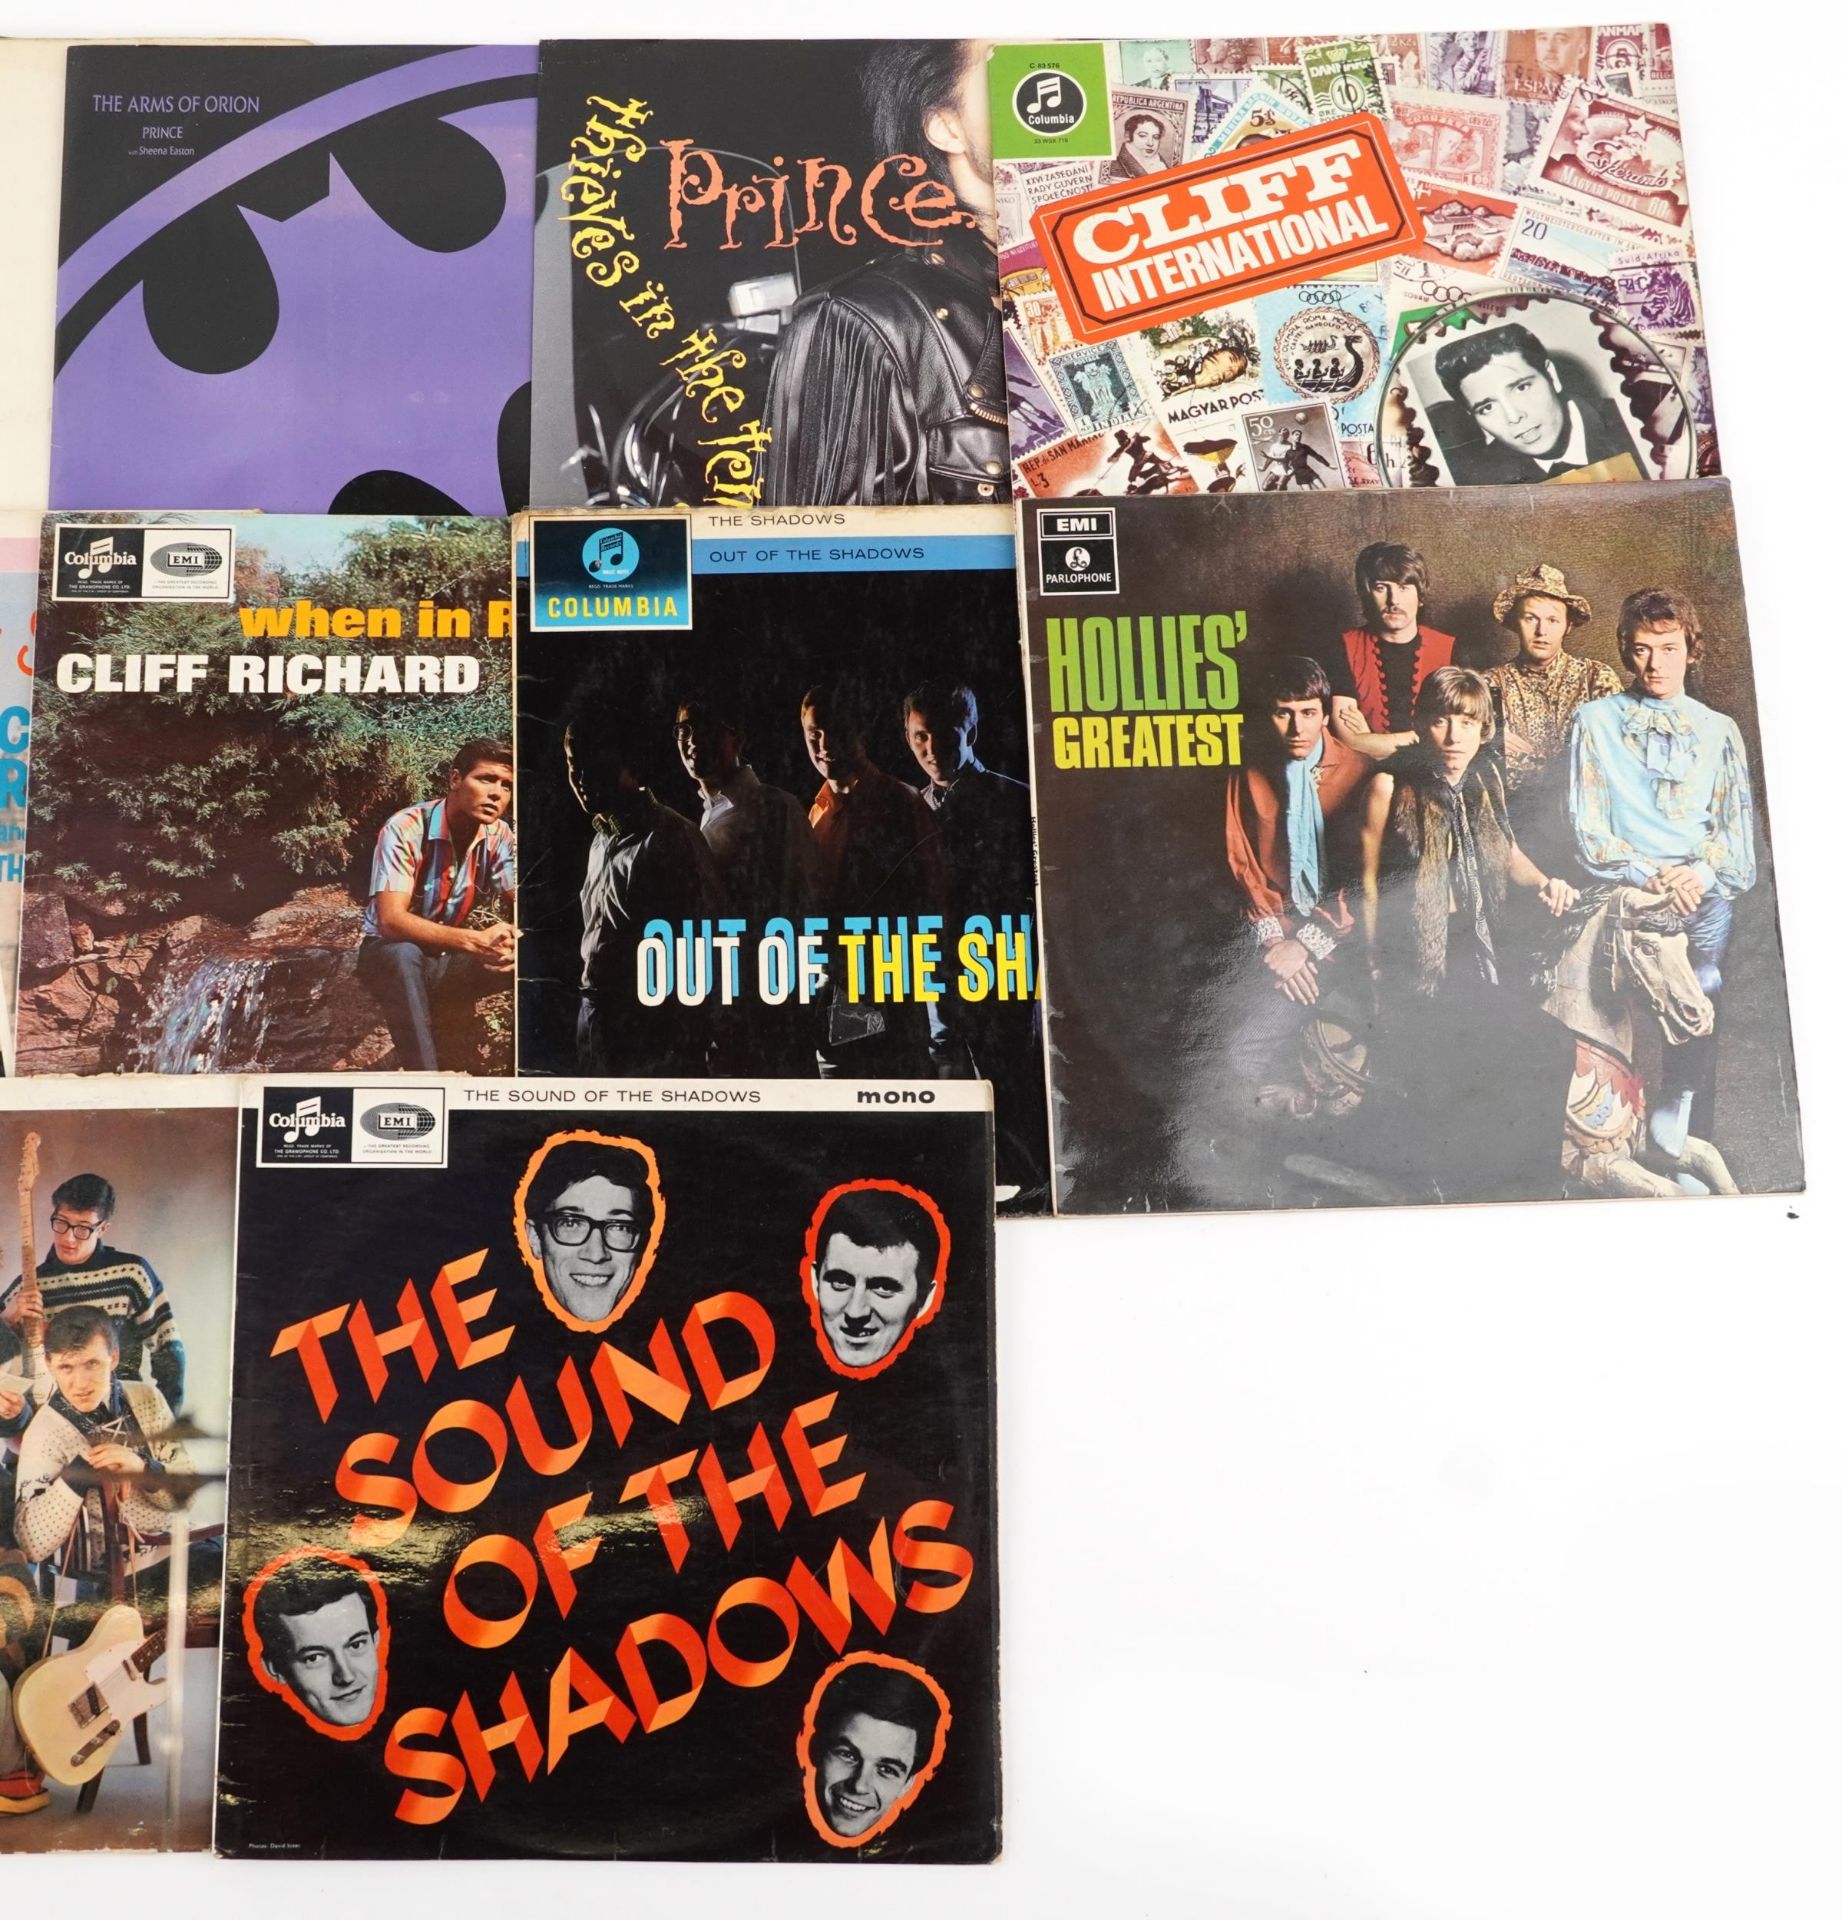 Vinyl LP records including The Beatles and Cliff Richard : For further information on this lot - Image 3 of 3